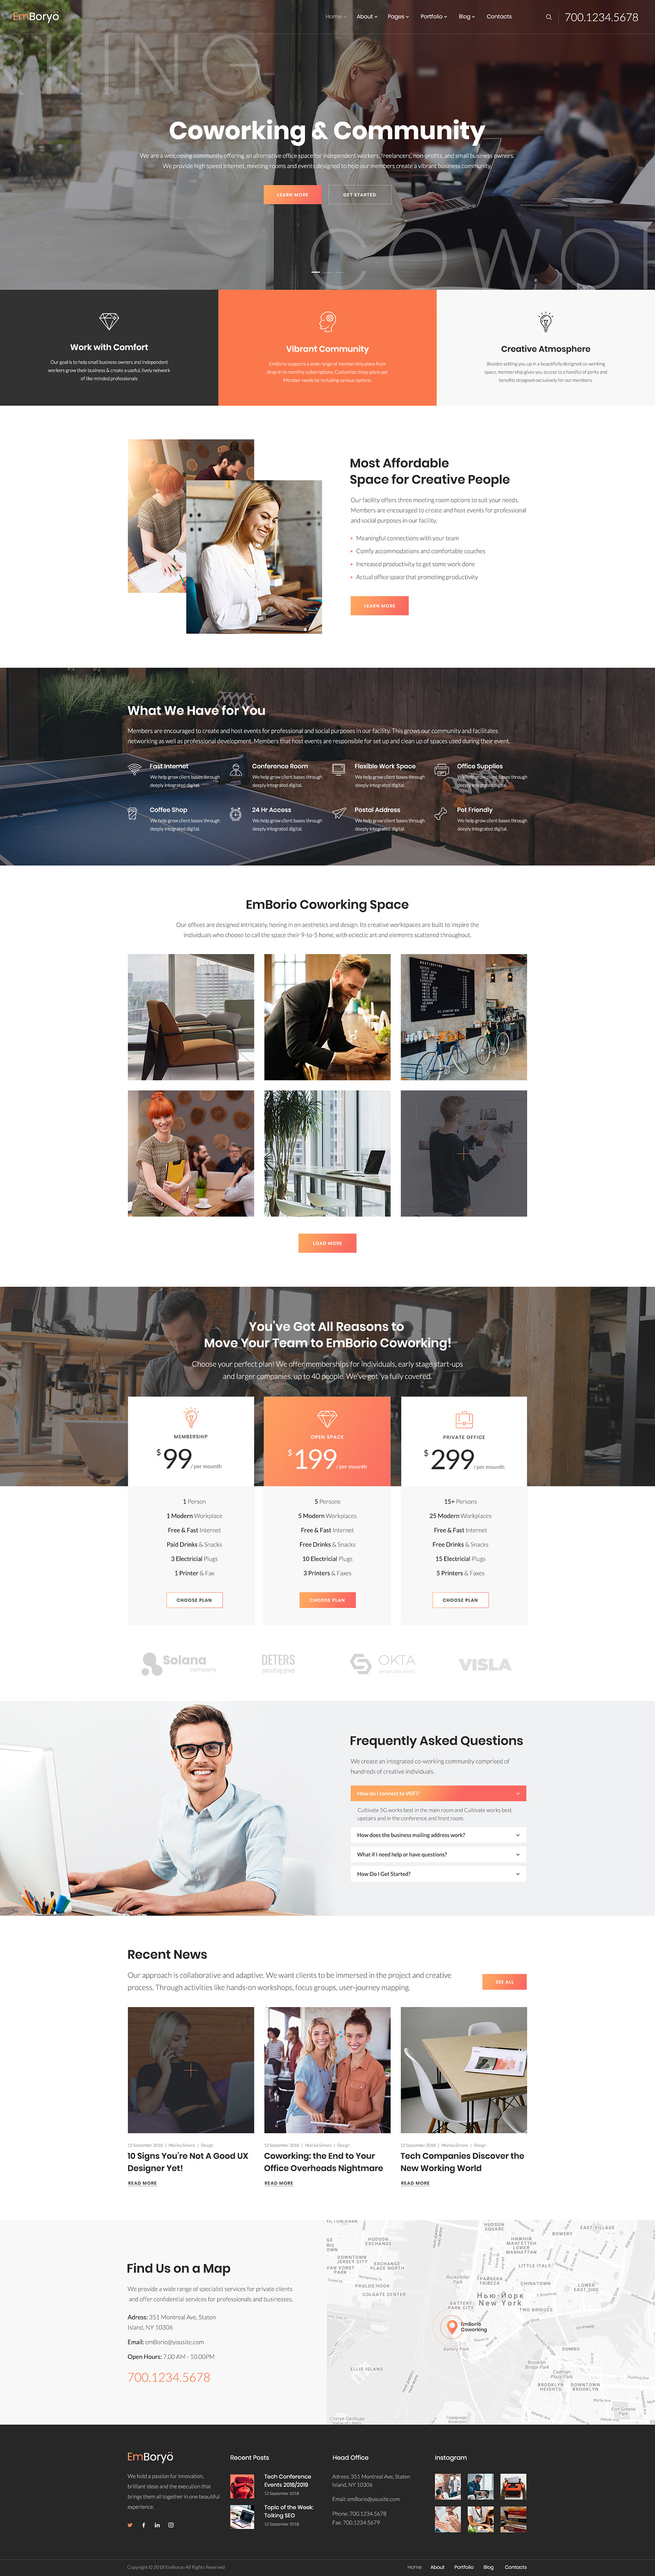 business creative agency srartup Webdesign UI ux modern Project